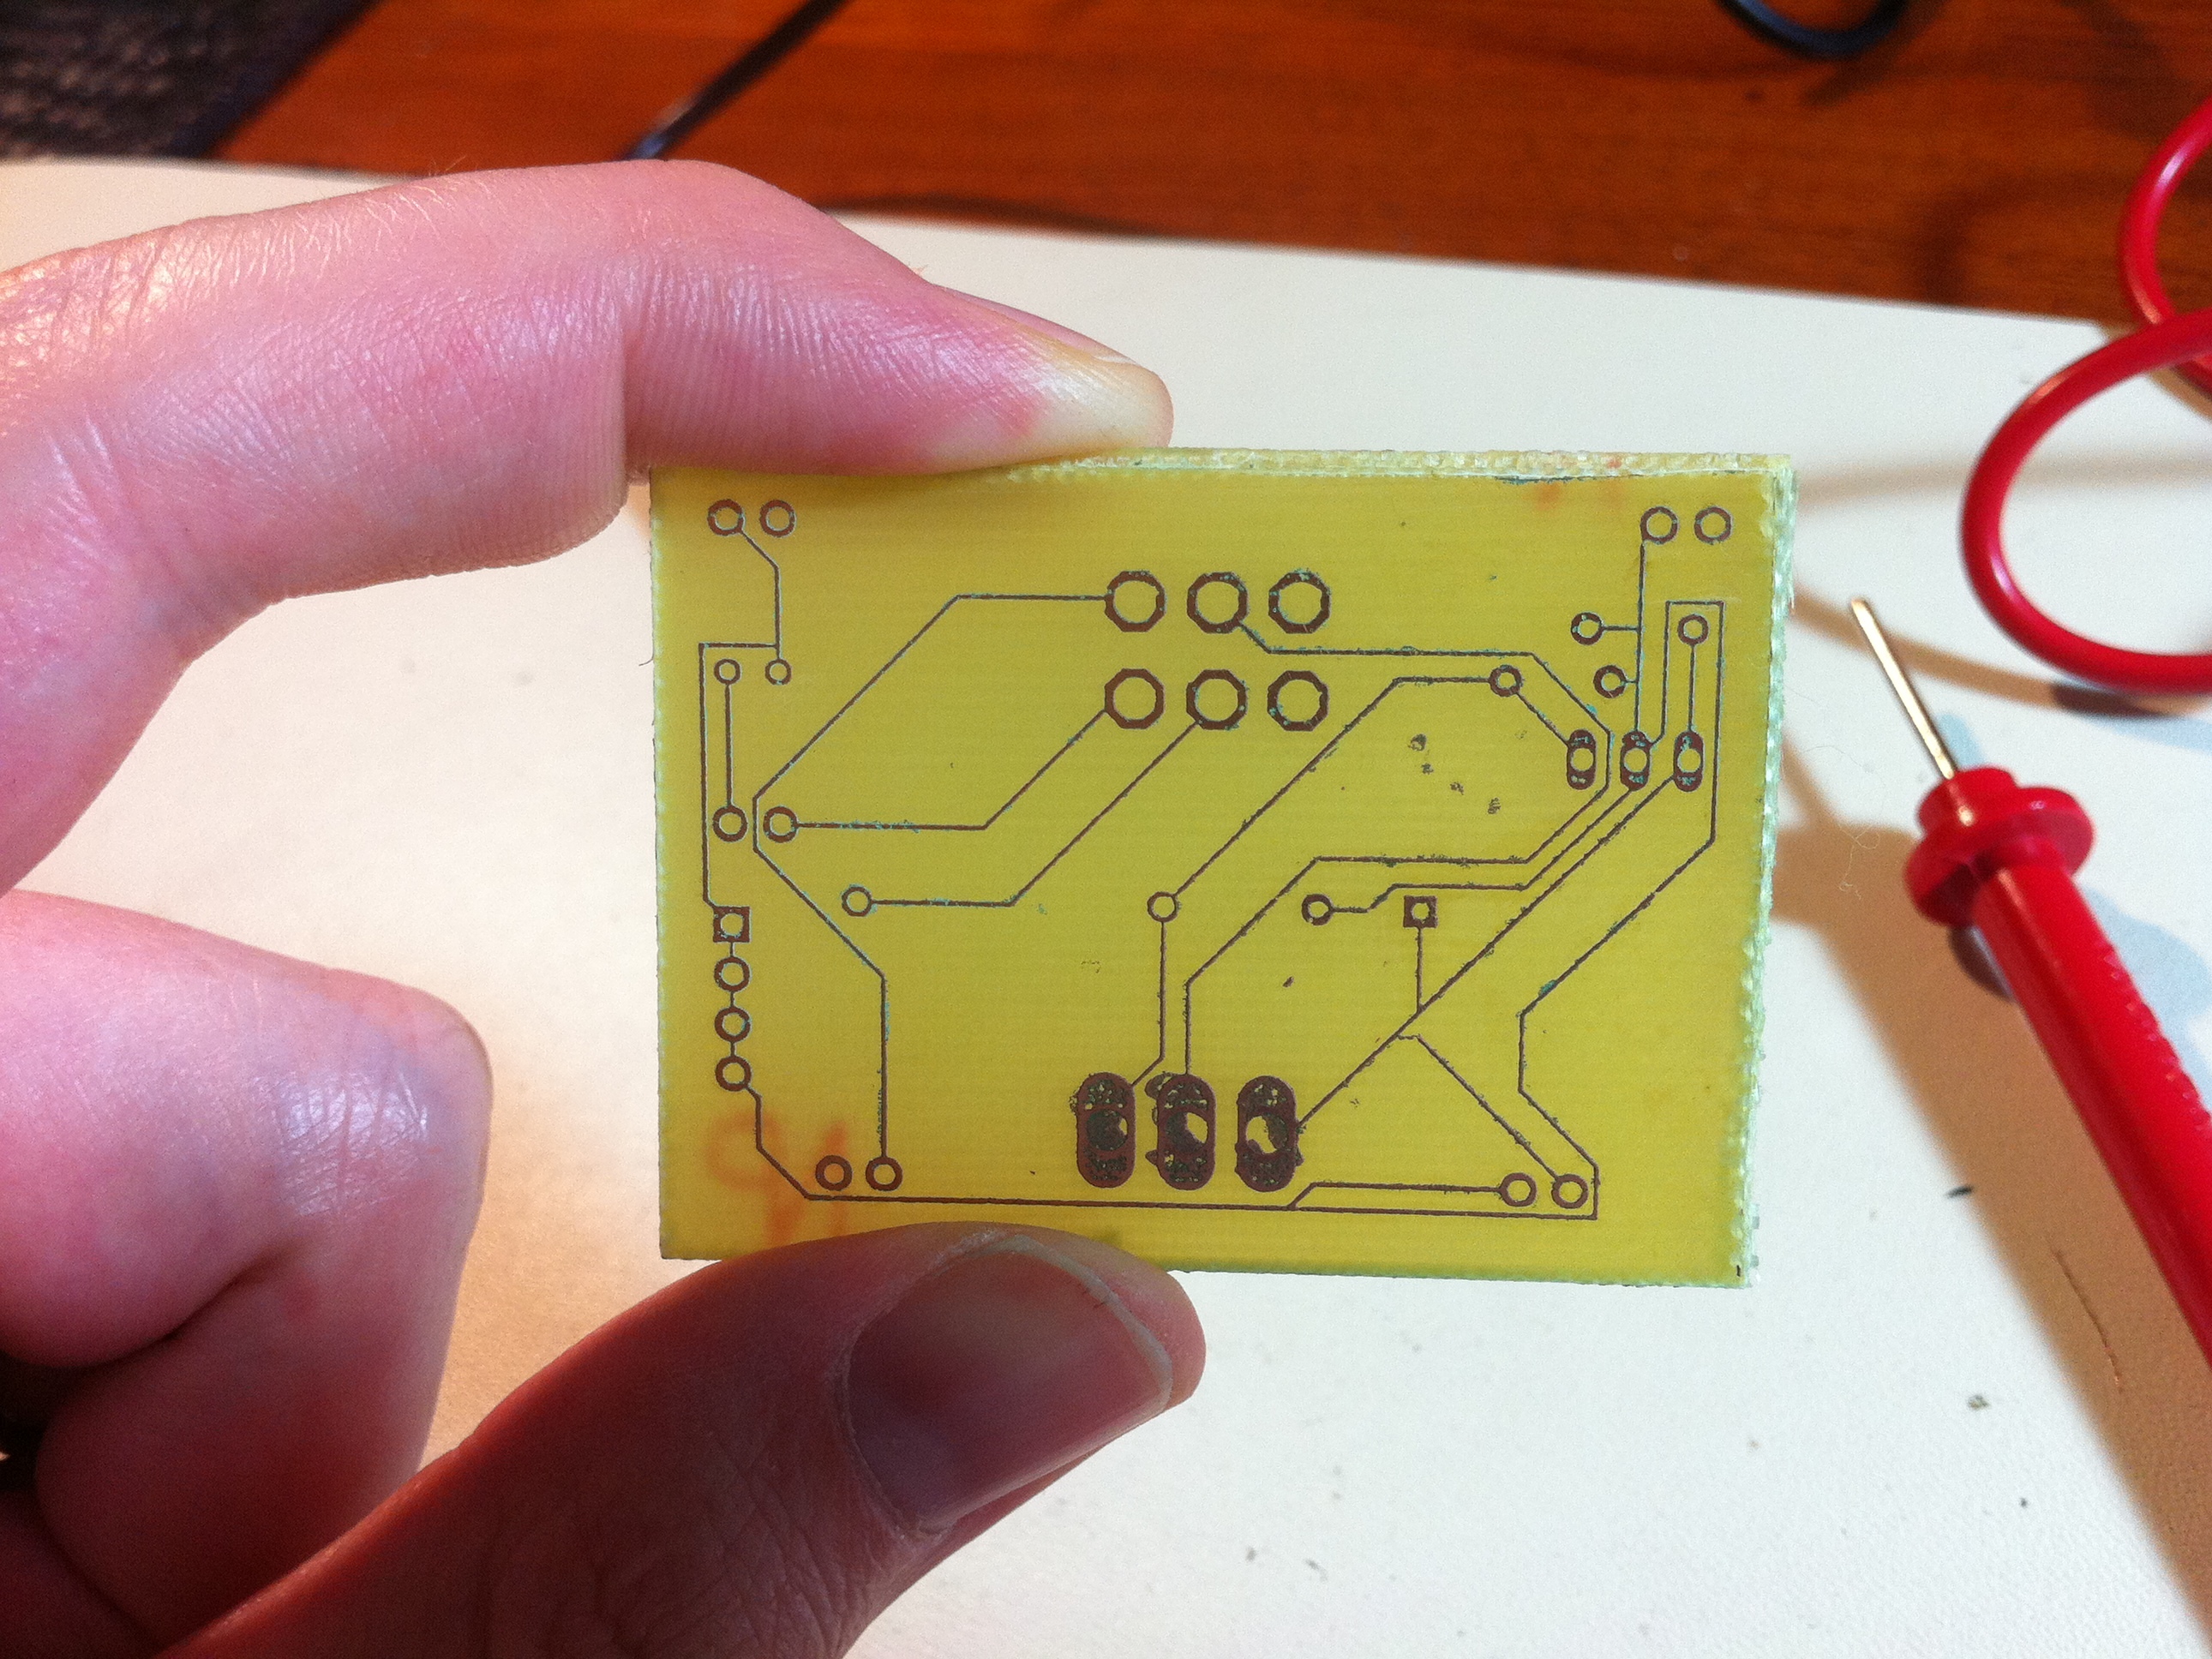 Cheap, Friendly, and Precise PCB Etching